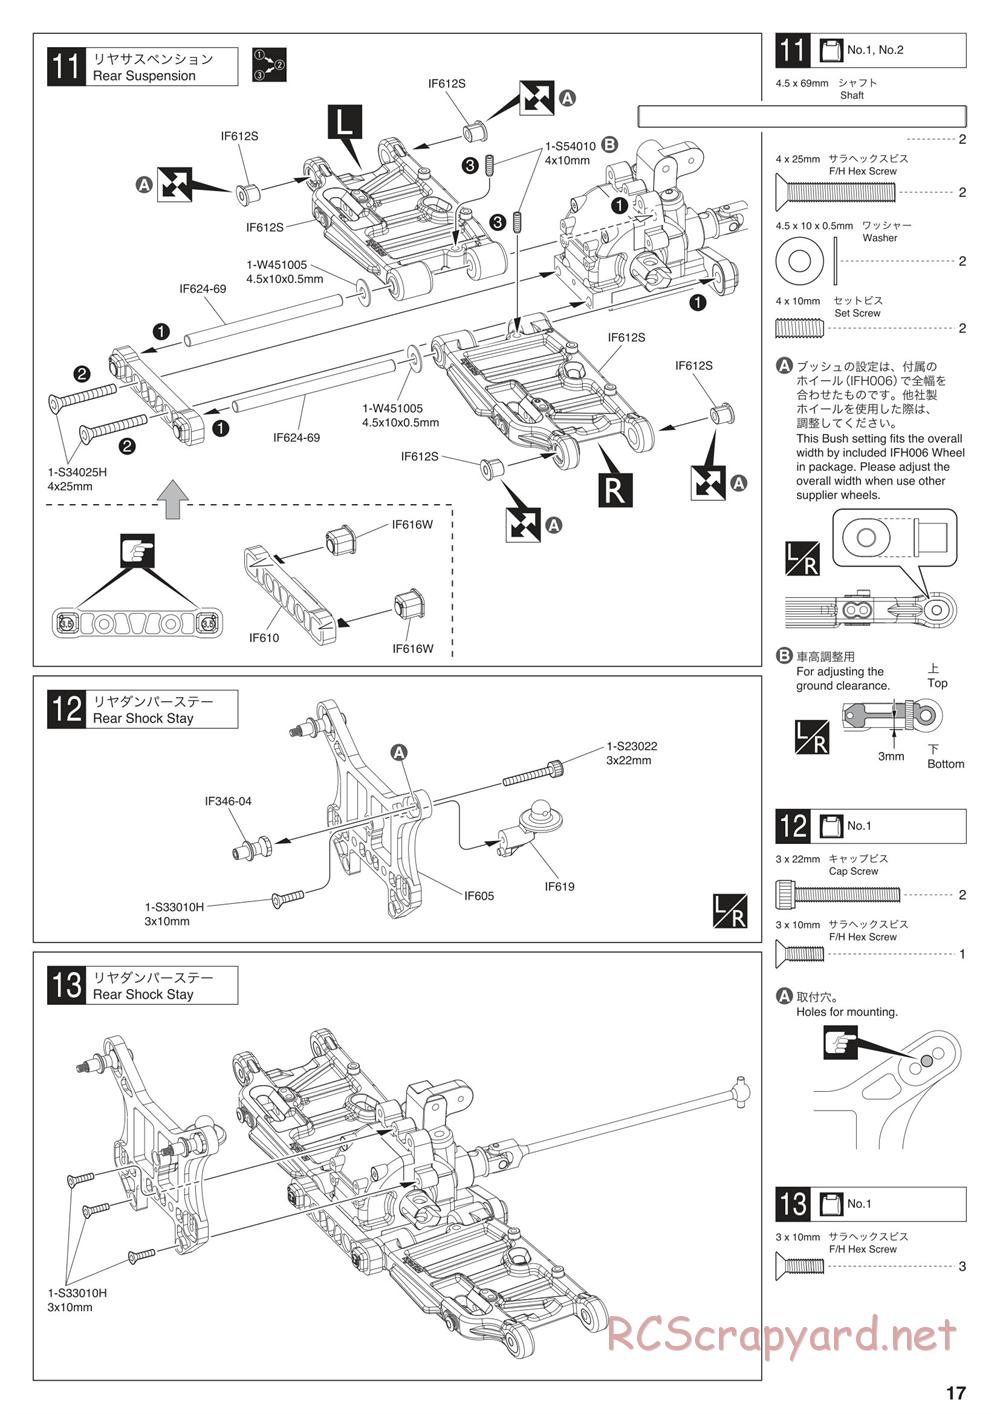 Kyosho - Inferno MP10 - Manual - Page 17